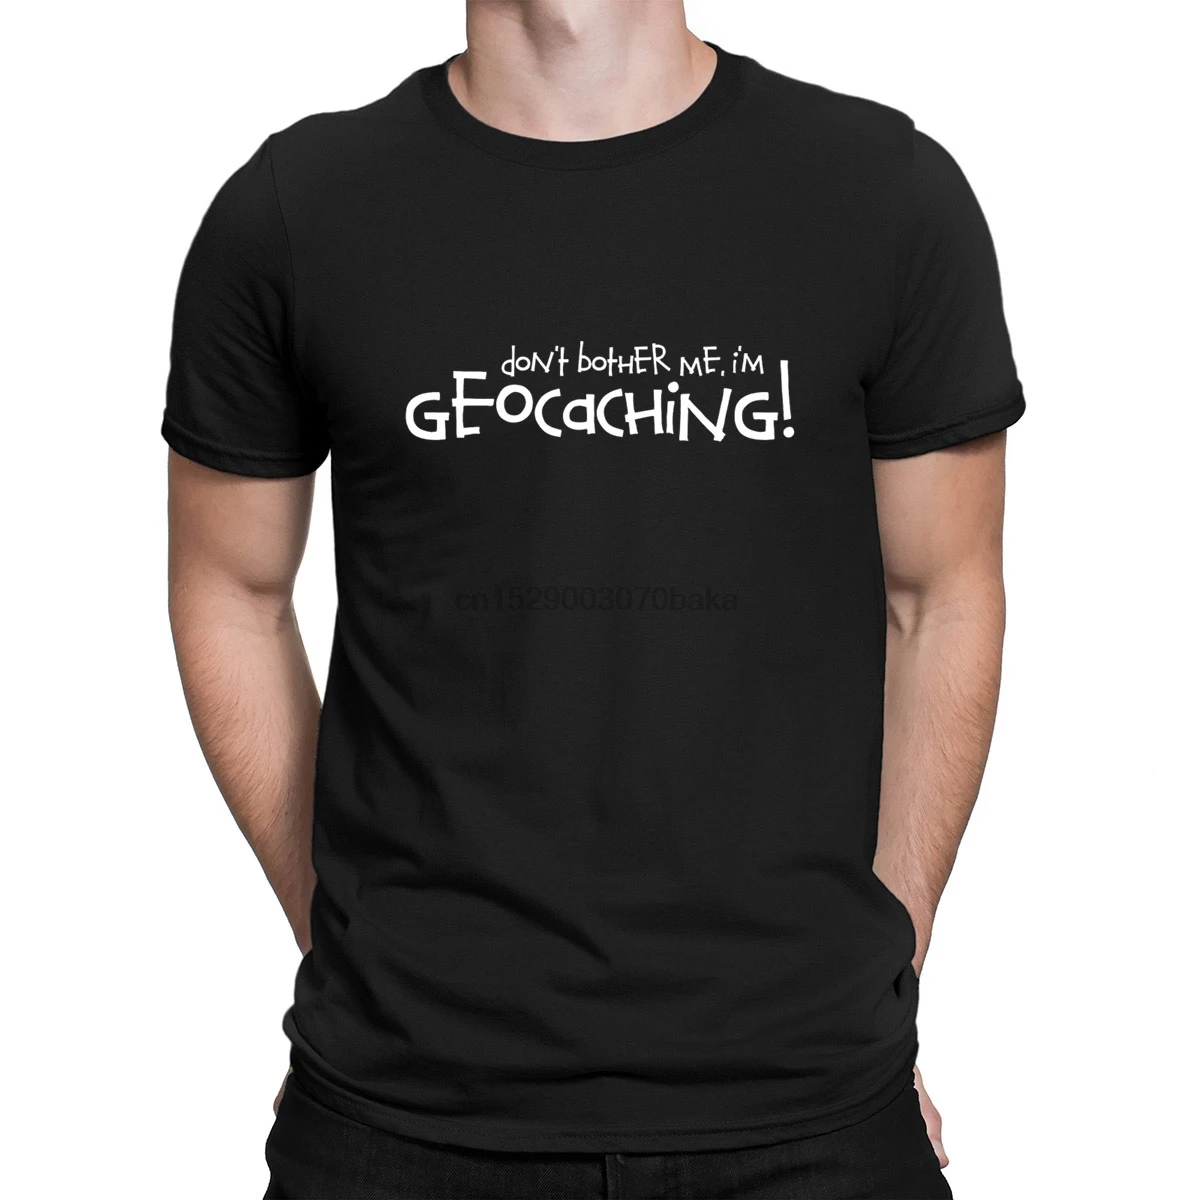 

DonBother Me Im Geocaching Tshirt Normal Graphic Male Sunlight T Shirt For Men Better Trendy Short Sleeve Print